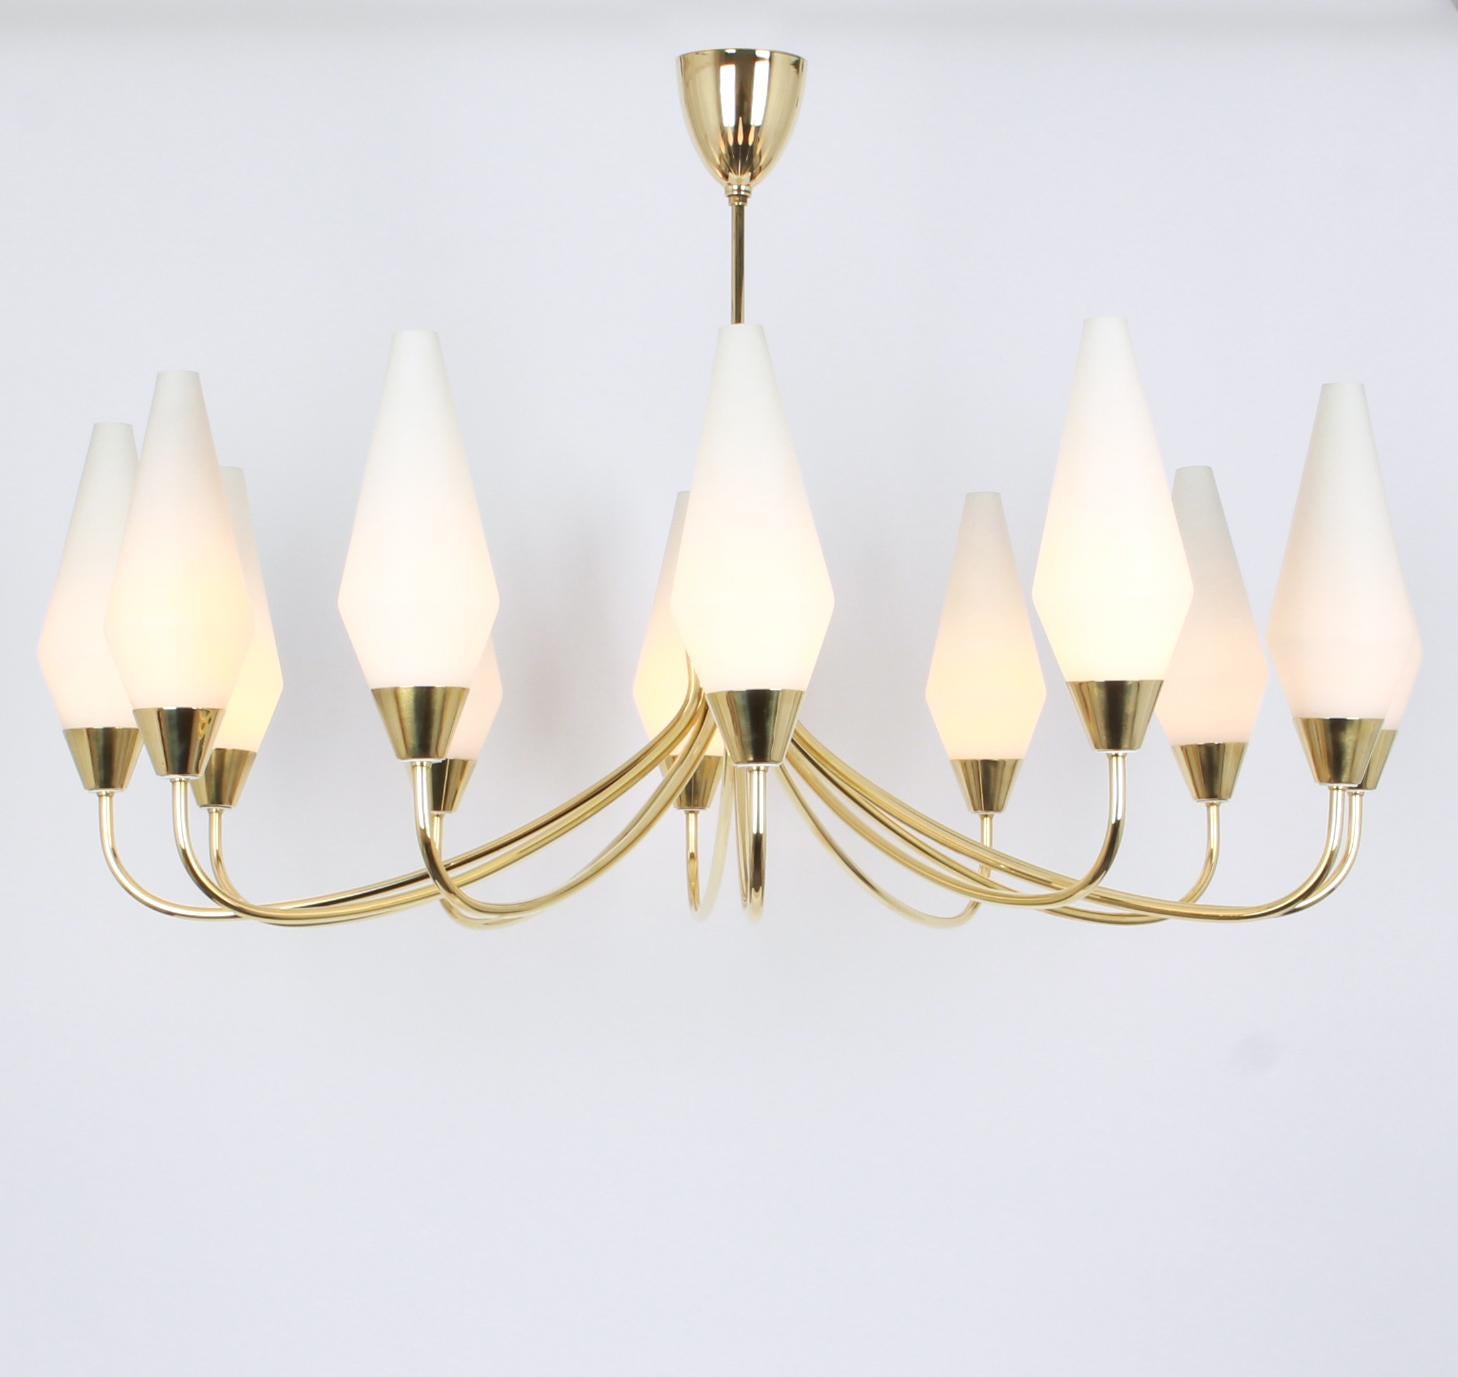 A stunning eight-light chandelier in the manner of Stilnovo, Germany, manufactured in circa 1950-1959.

High quality and in very good condition. Cleaned, well-wired and ready to use. 

The fixture requires 12 x E14 standard bulbs with 40W max